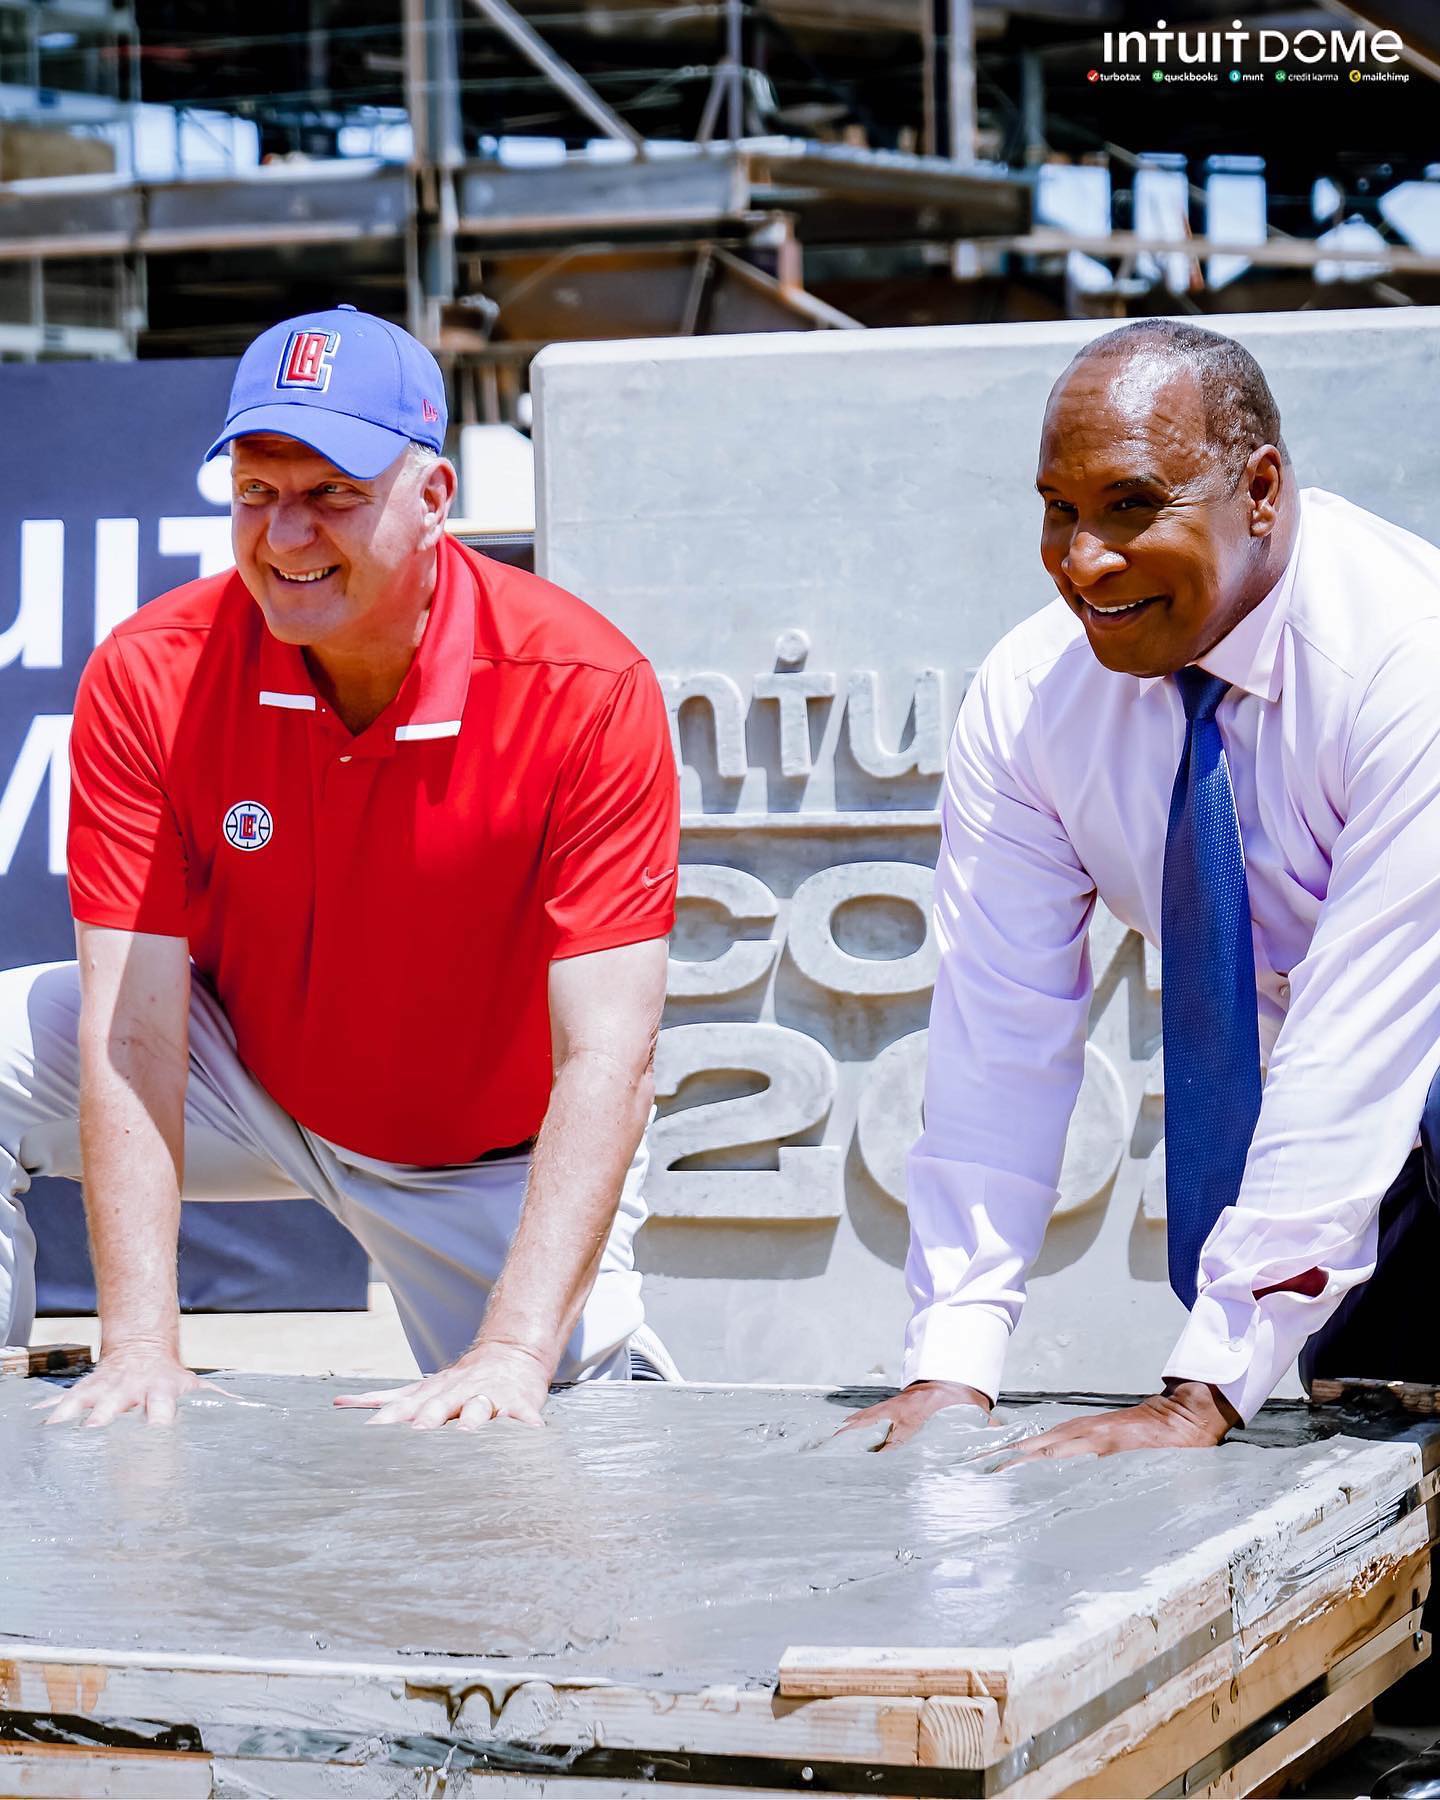 INTUIT DOME CONSTRUCTION UPDATE  #ClipperNation, yesterday the Clippers celebra...